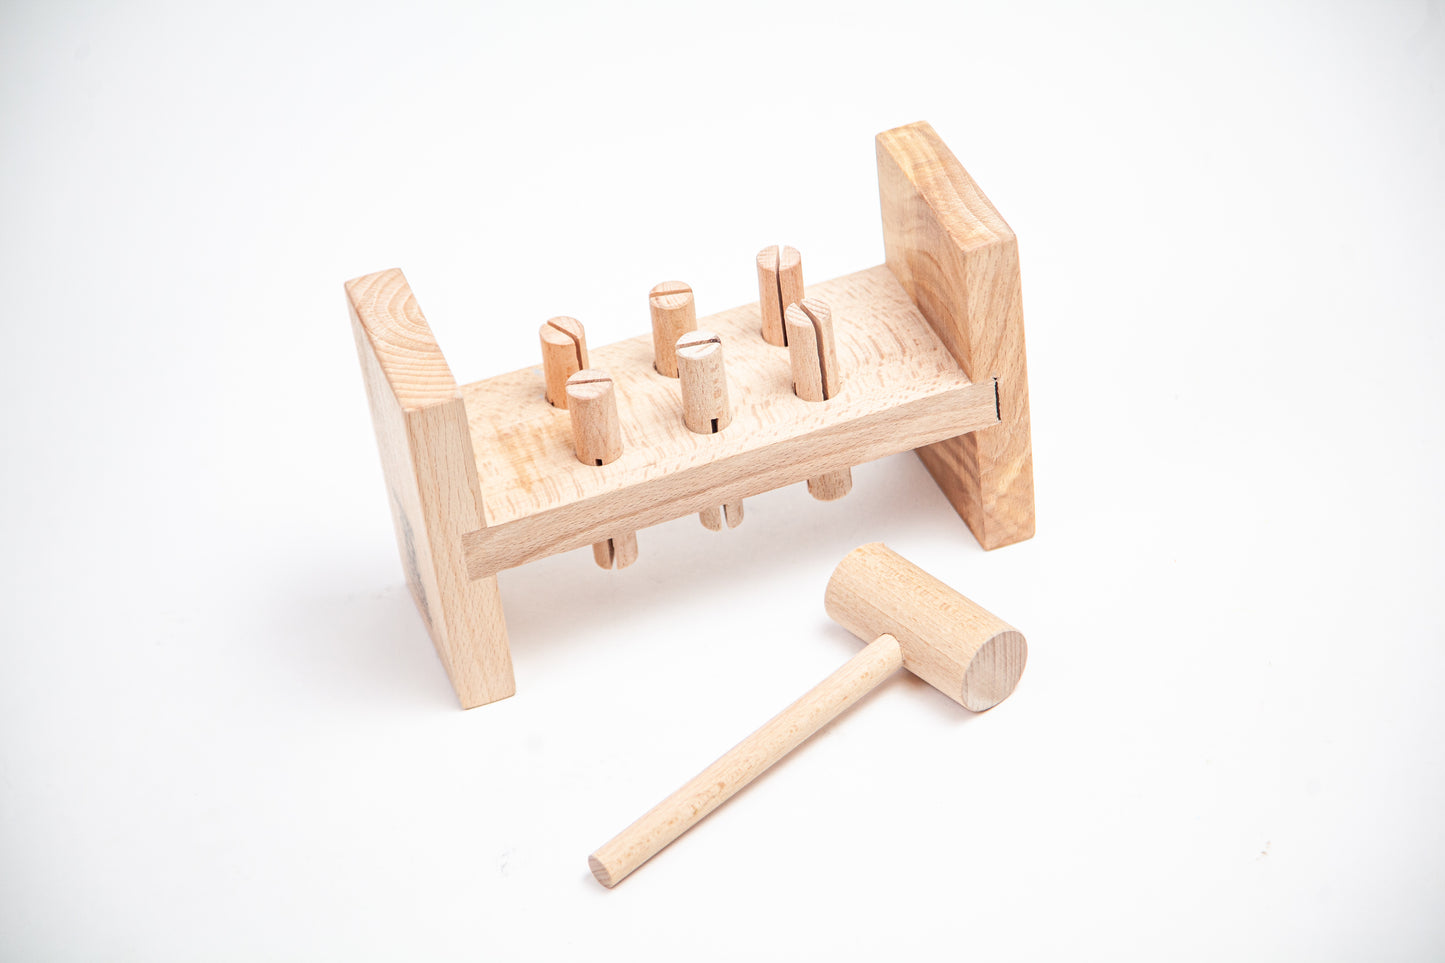 WOODEN HAMMER AND PEG POUNDING